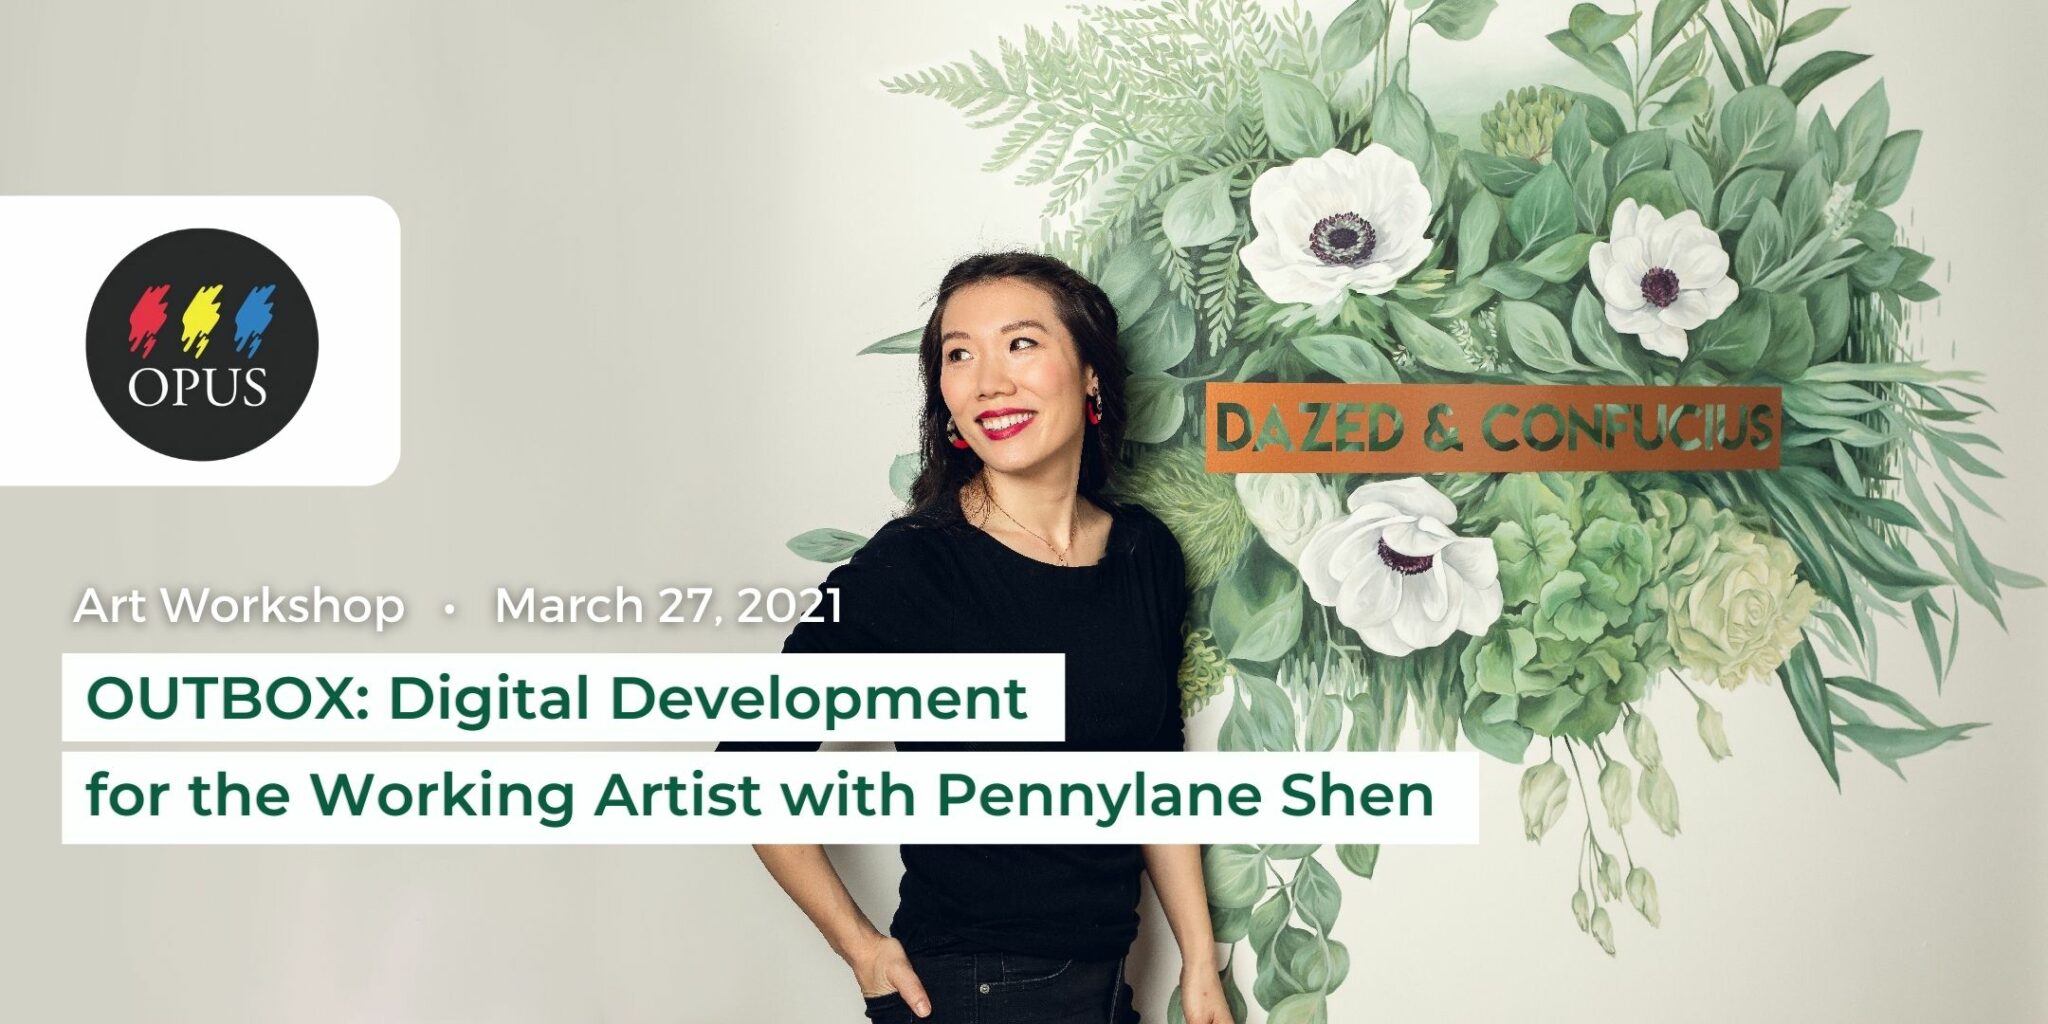 Opus Event: Digital Development for Artists with Pennylane Shen of Dazed & Confucius